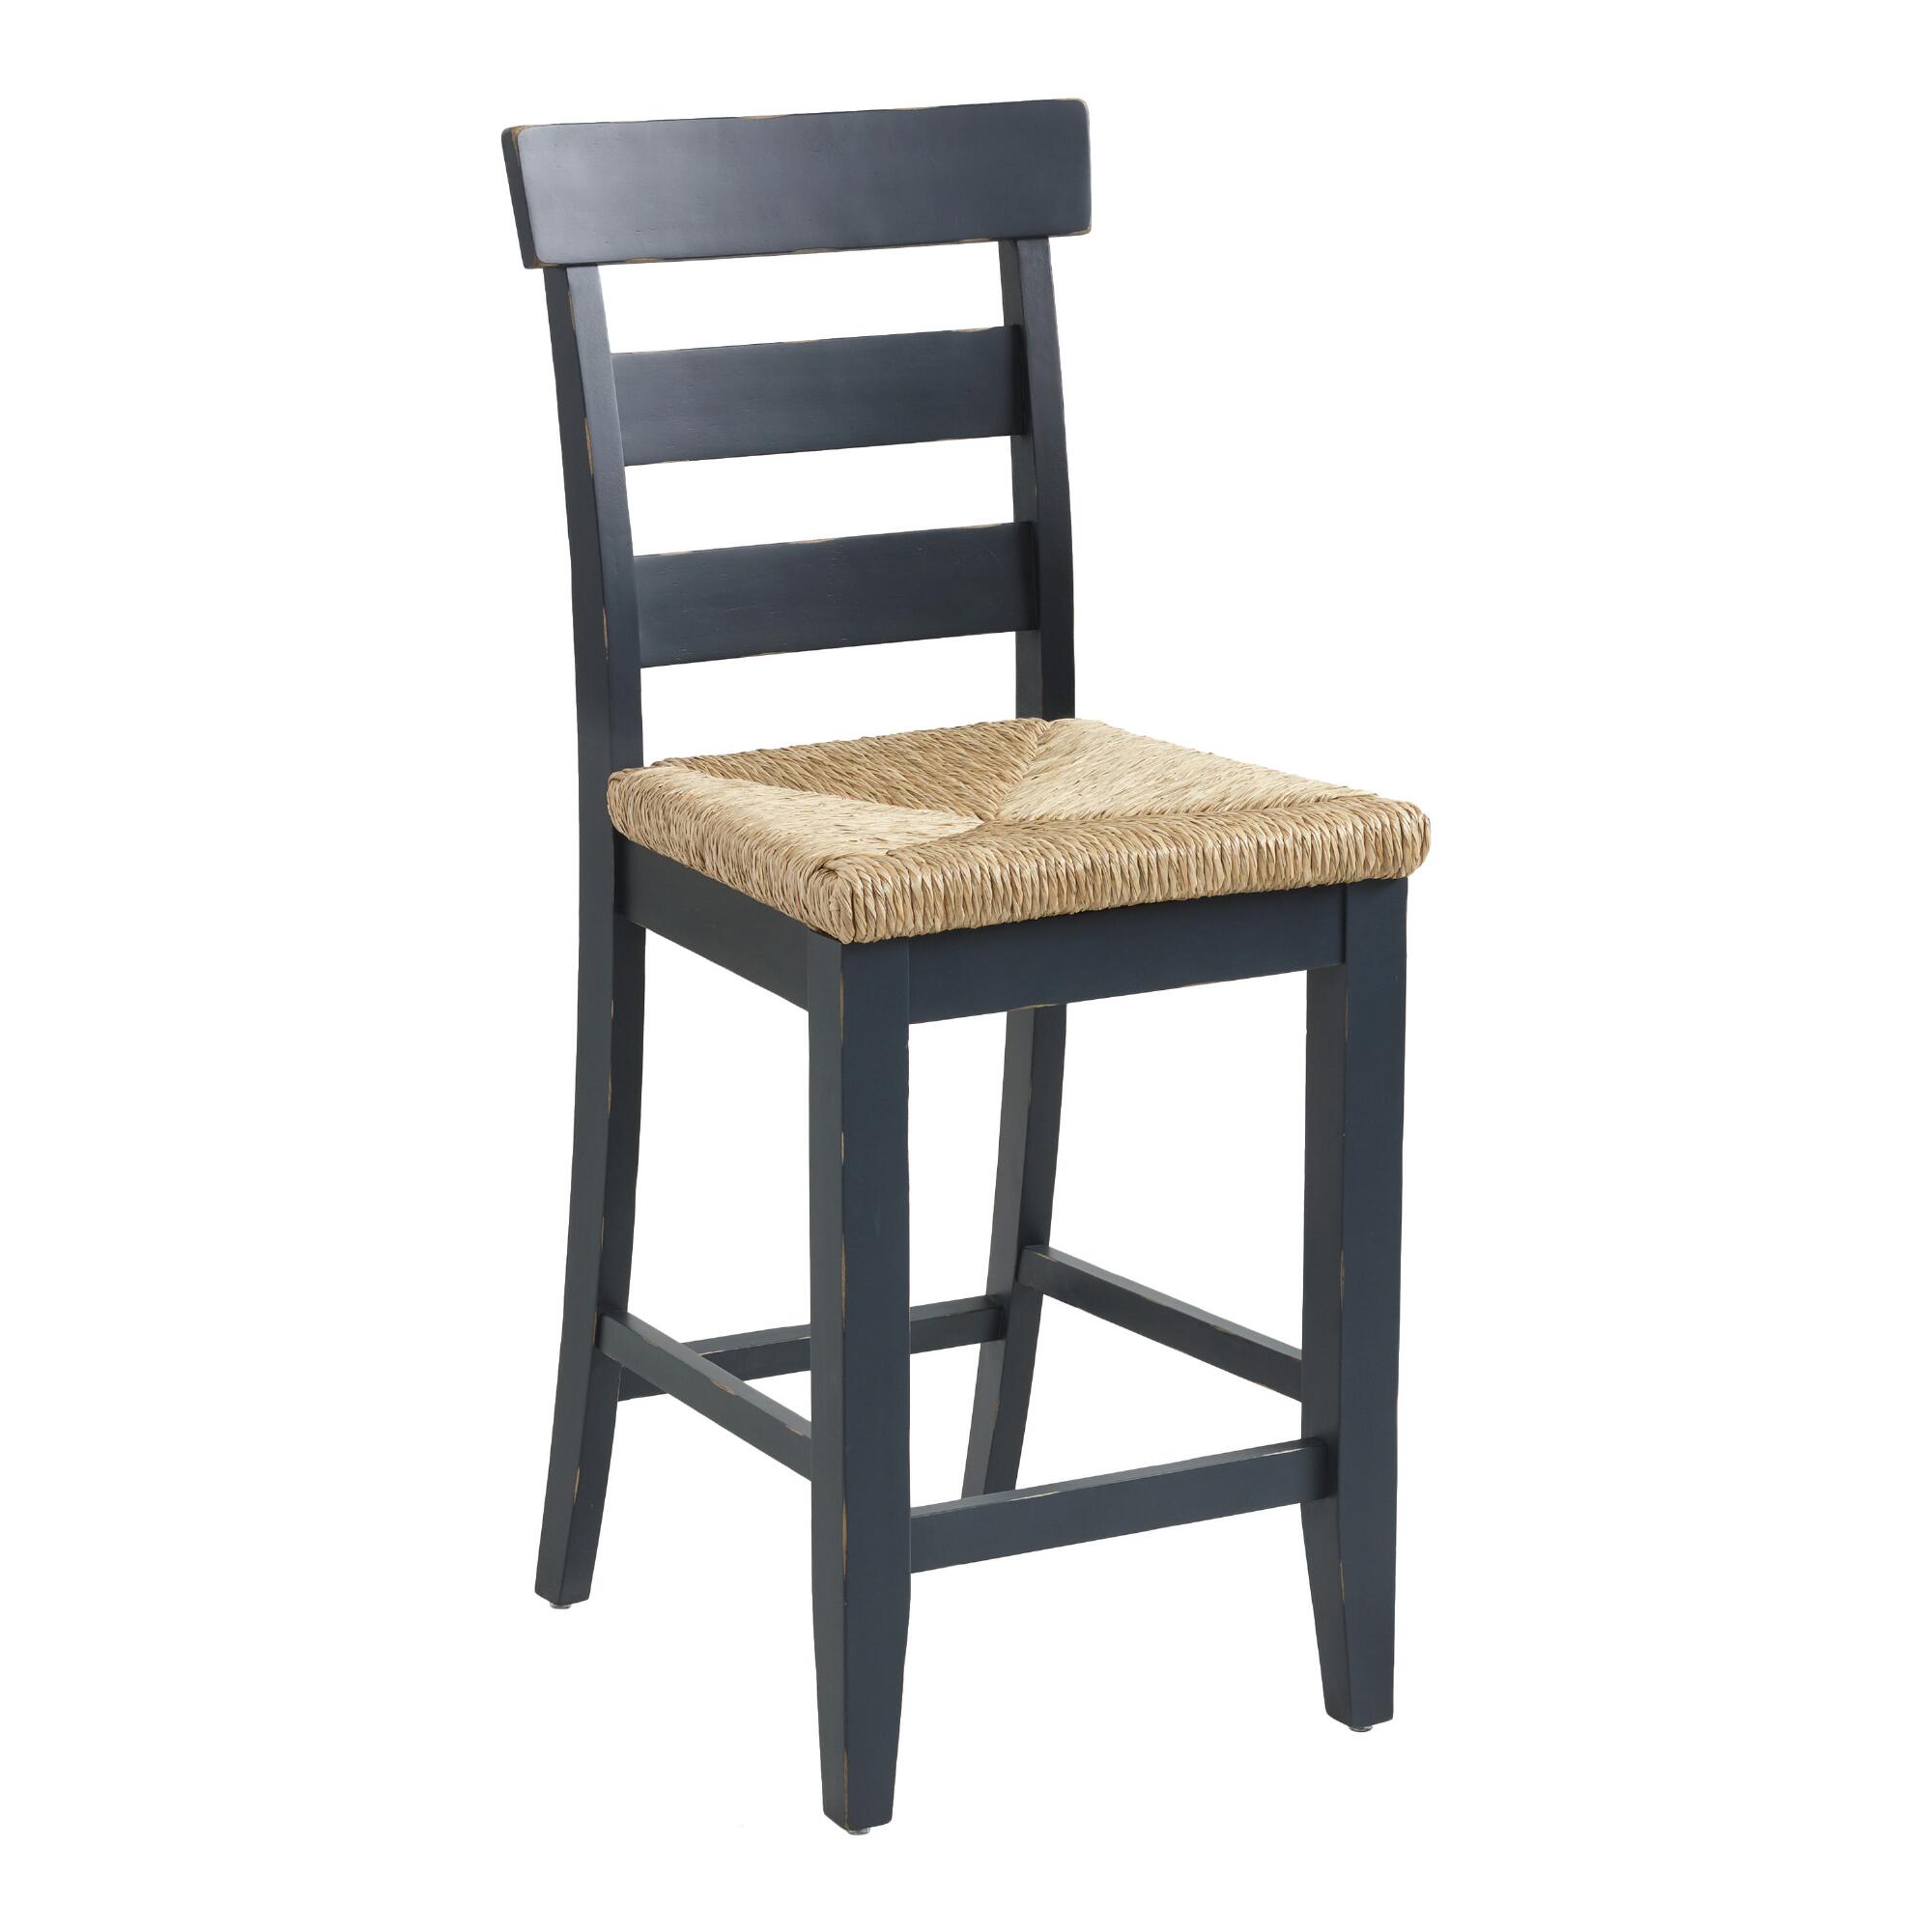 Wood and Seagrass Amelia Counter Stool: Black by World Market